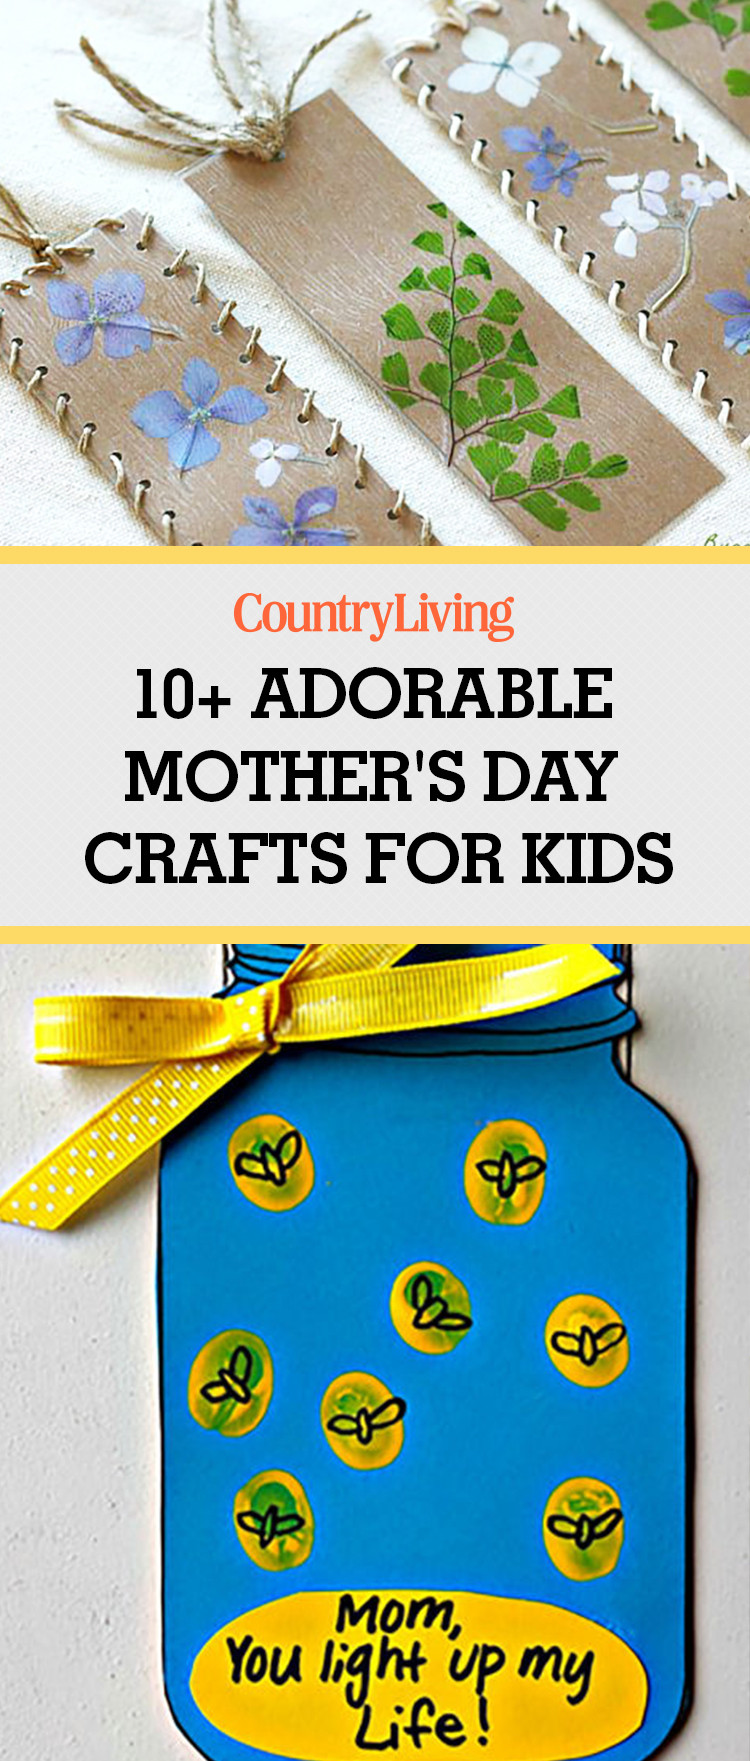 Pinterest Mothers Day Crafts
 10 Cute Mother s Day Crafts for Kids Preschool Mothers